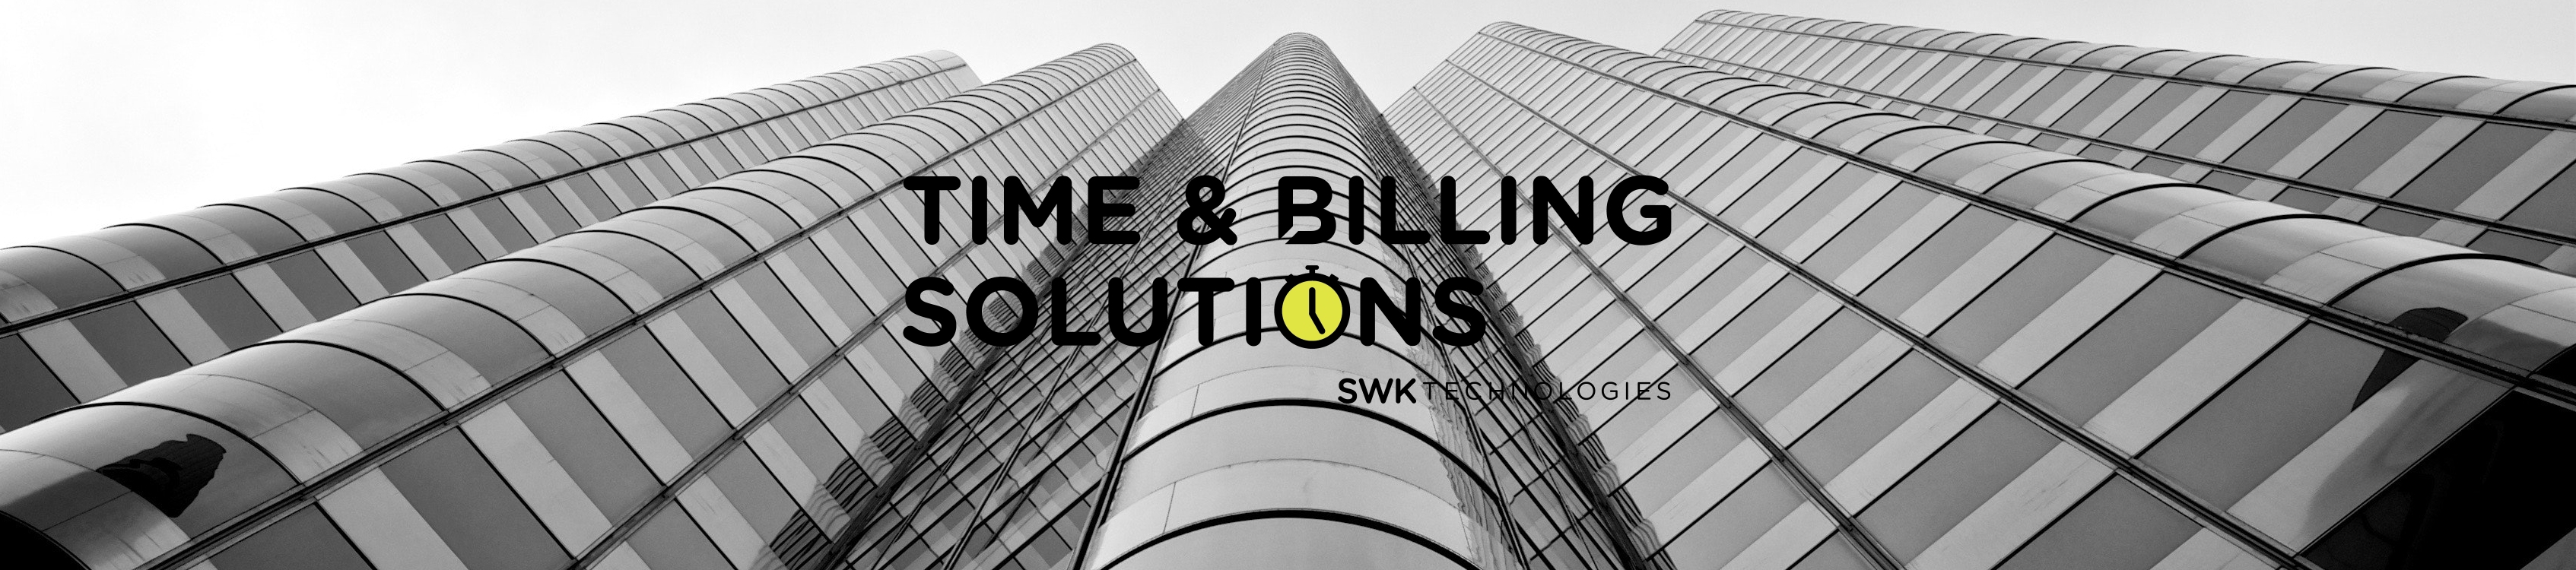 time and billing solutions